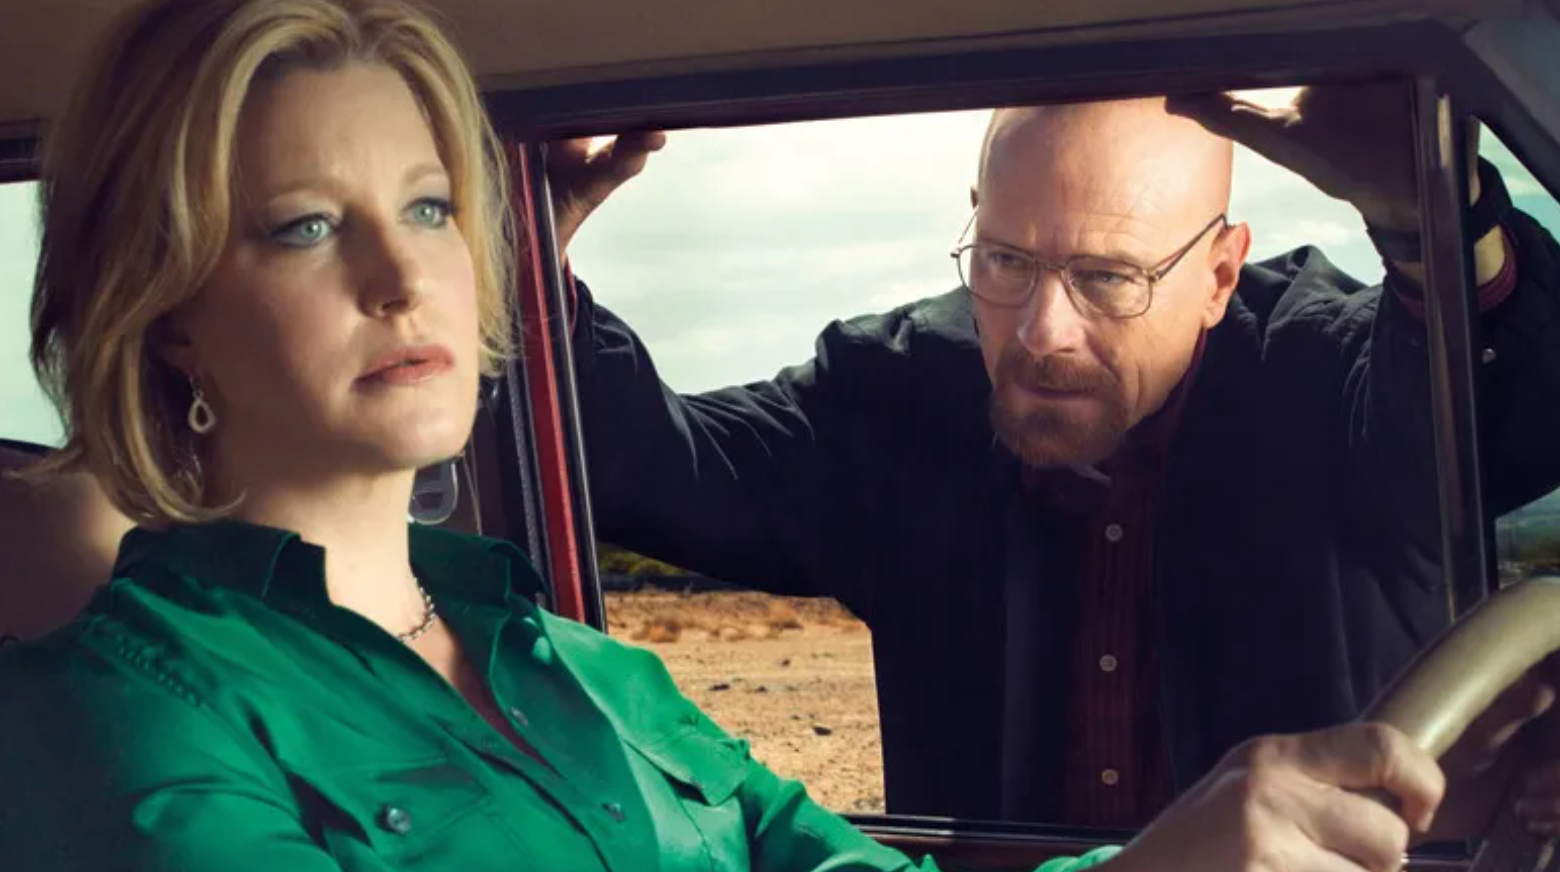 breaking bad star anna gunn says she no longer receives misogynistic trolling over character